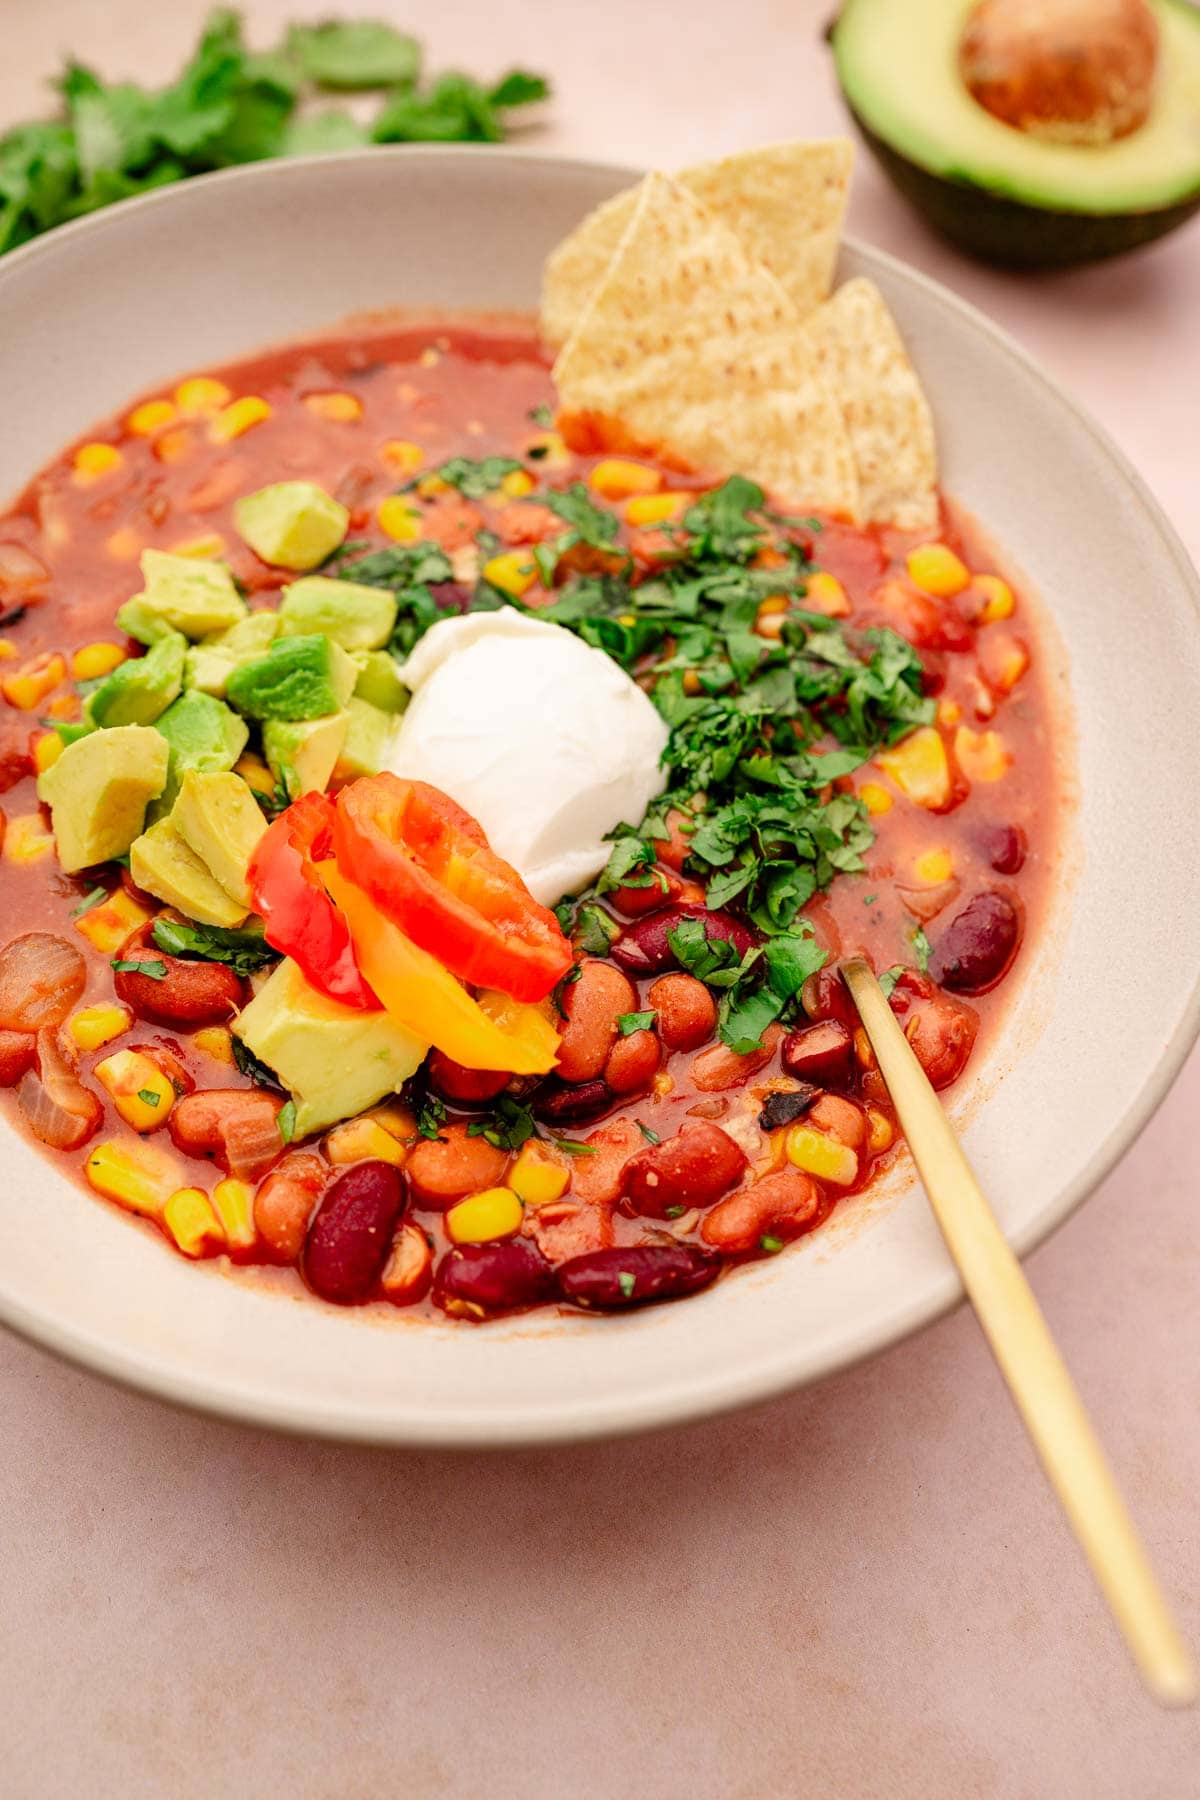 A slow cooker vegetarian chili with mexican beans, avocado, and sour cream.